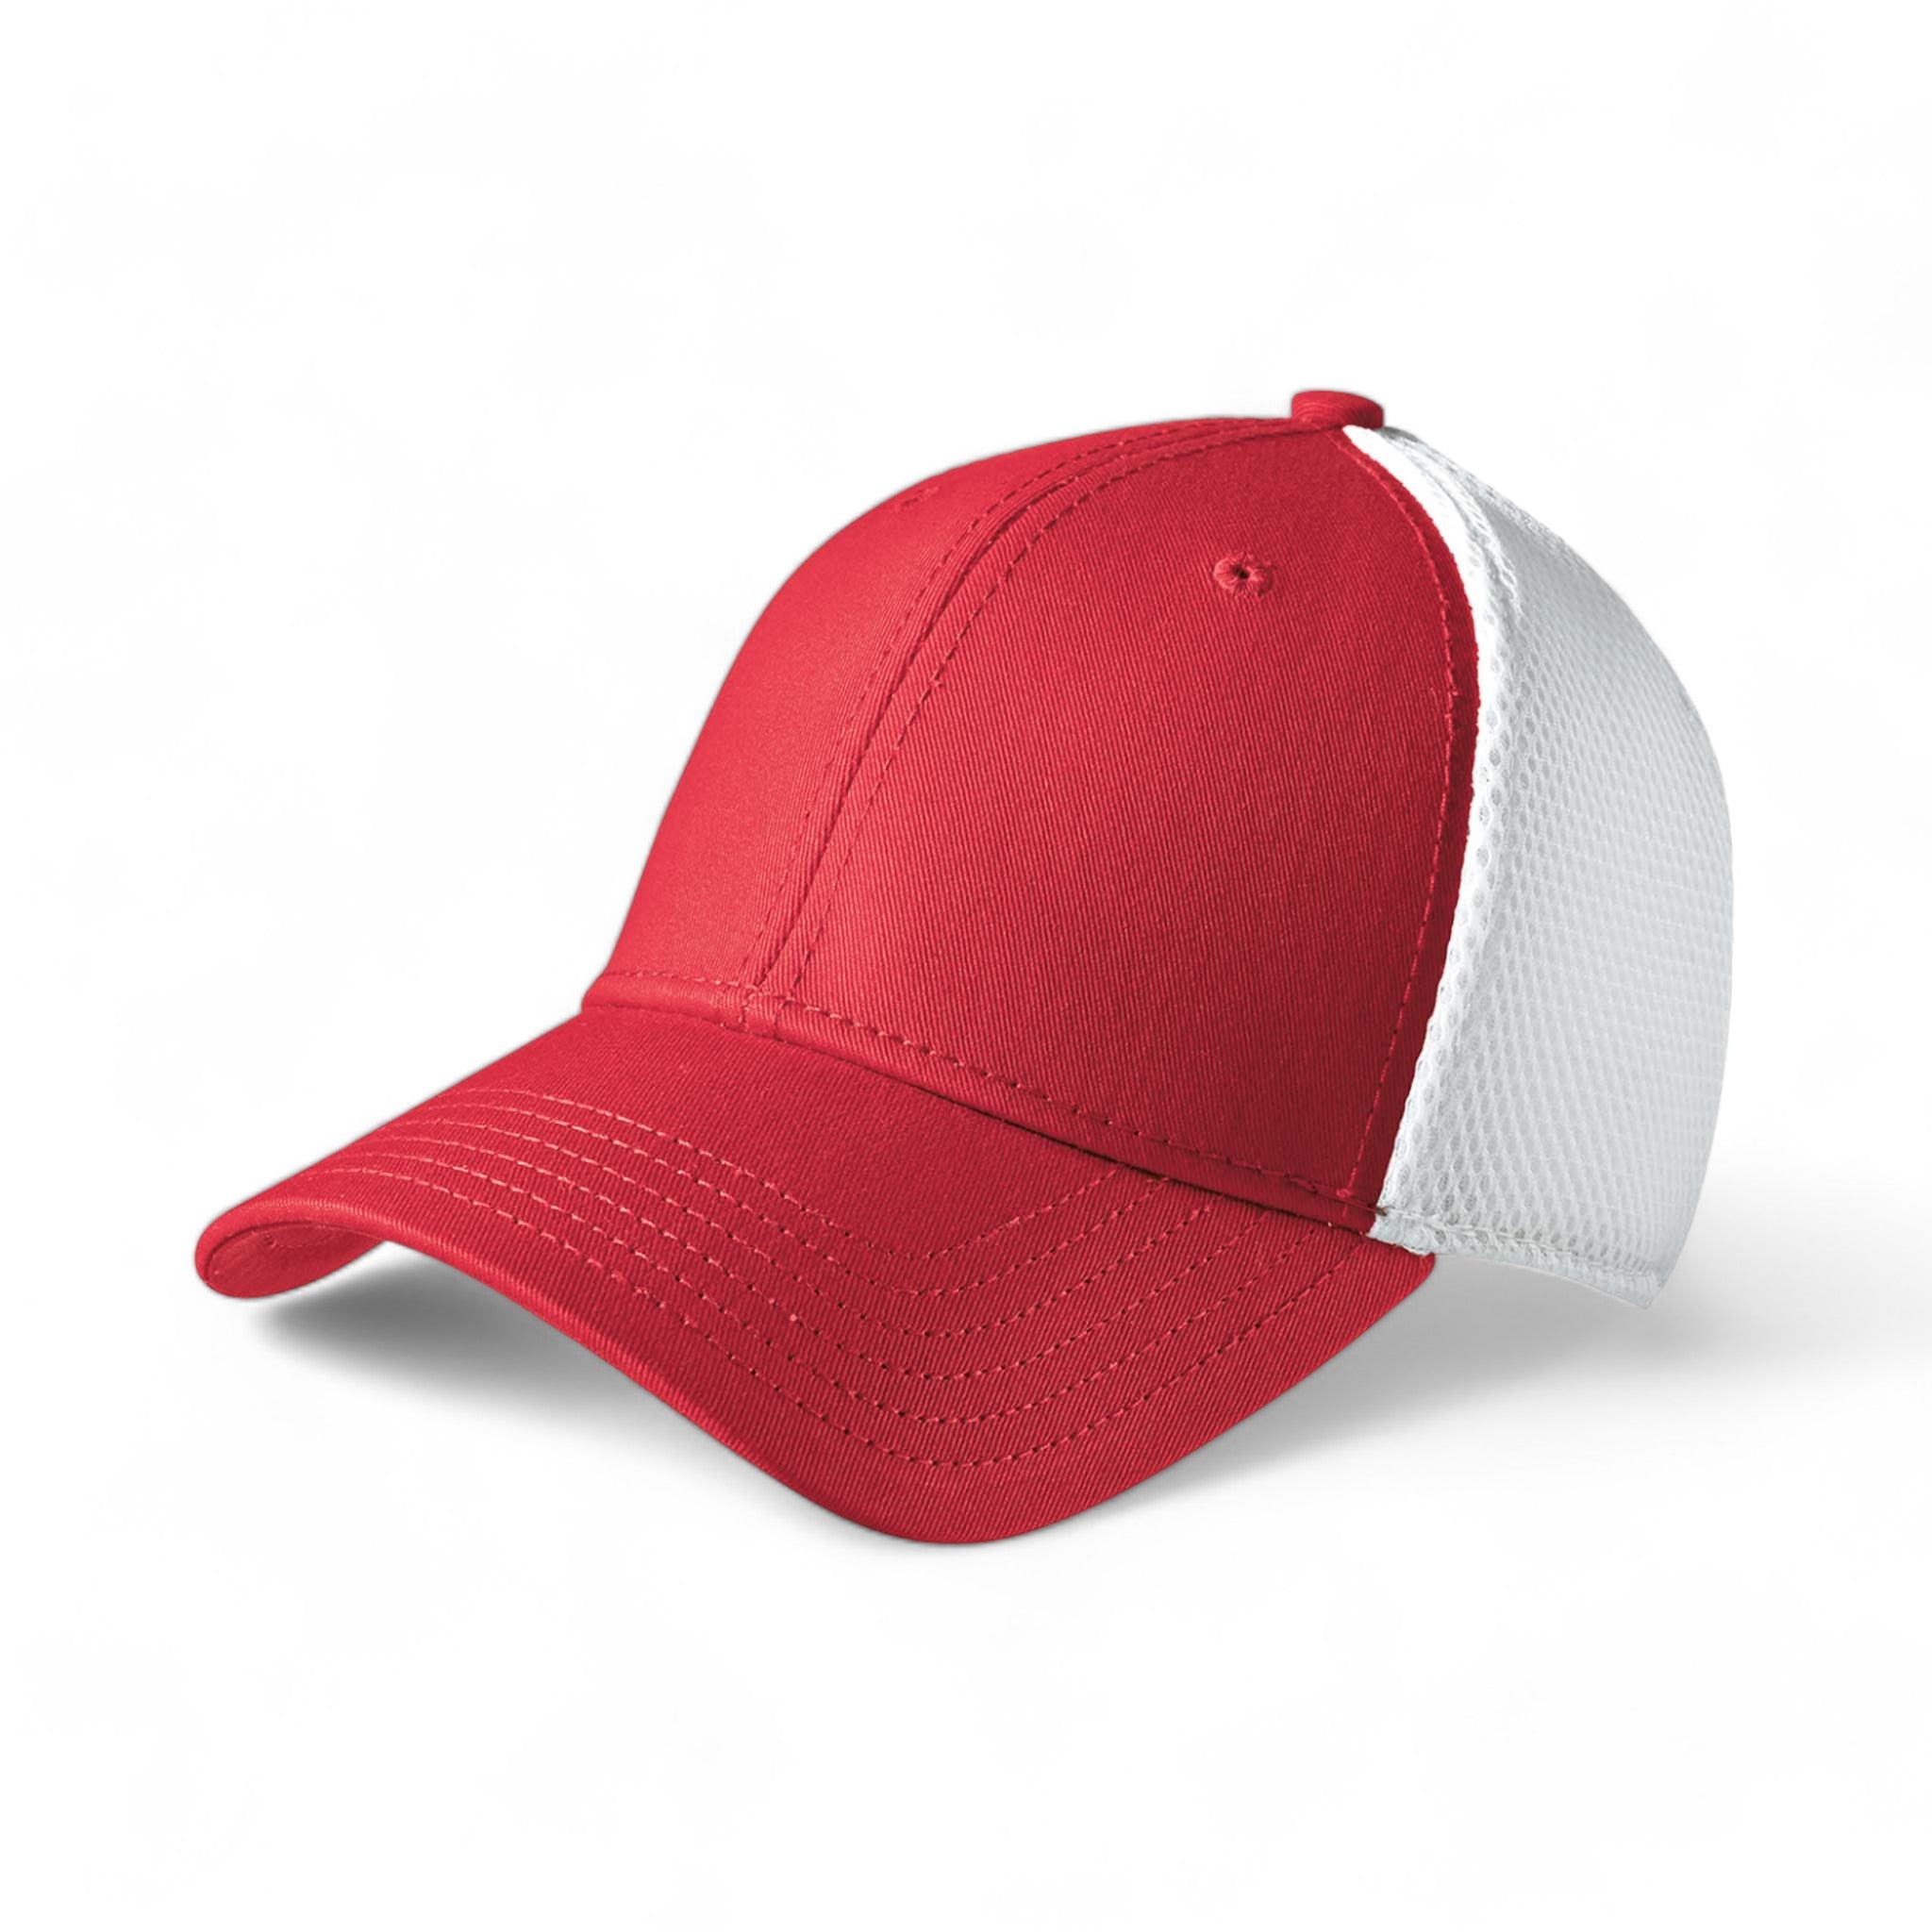 Side view of New Era NE1020 custom hat in scarlet red and white